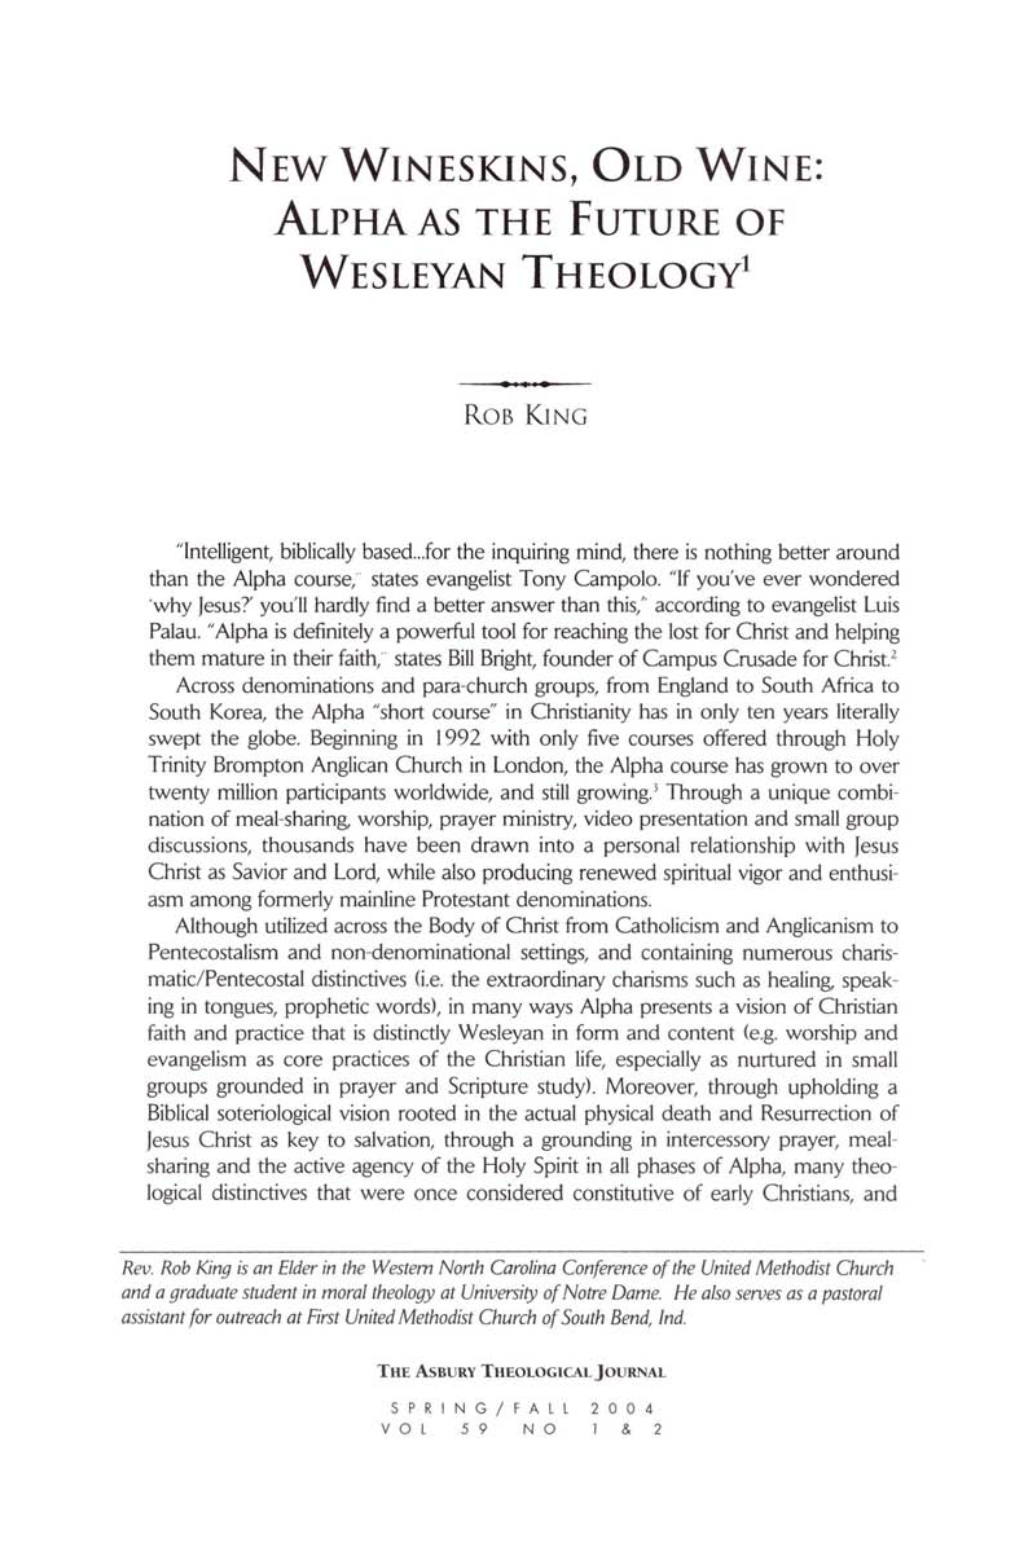 New Wineskins, Old Wine: Alpha As the Future of Wesleyan Theology